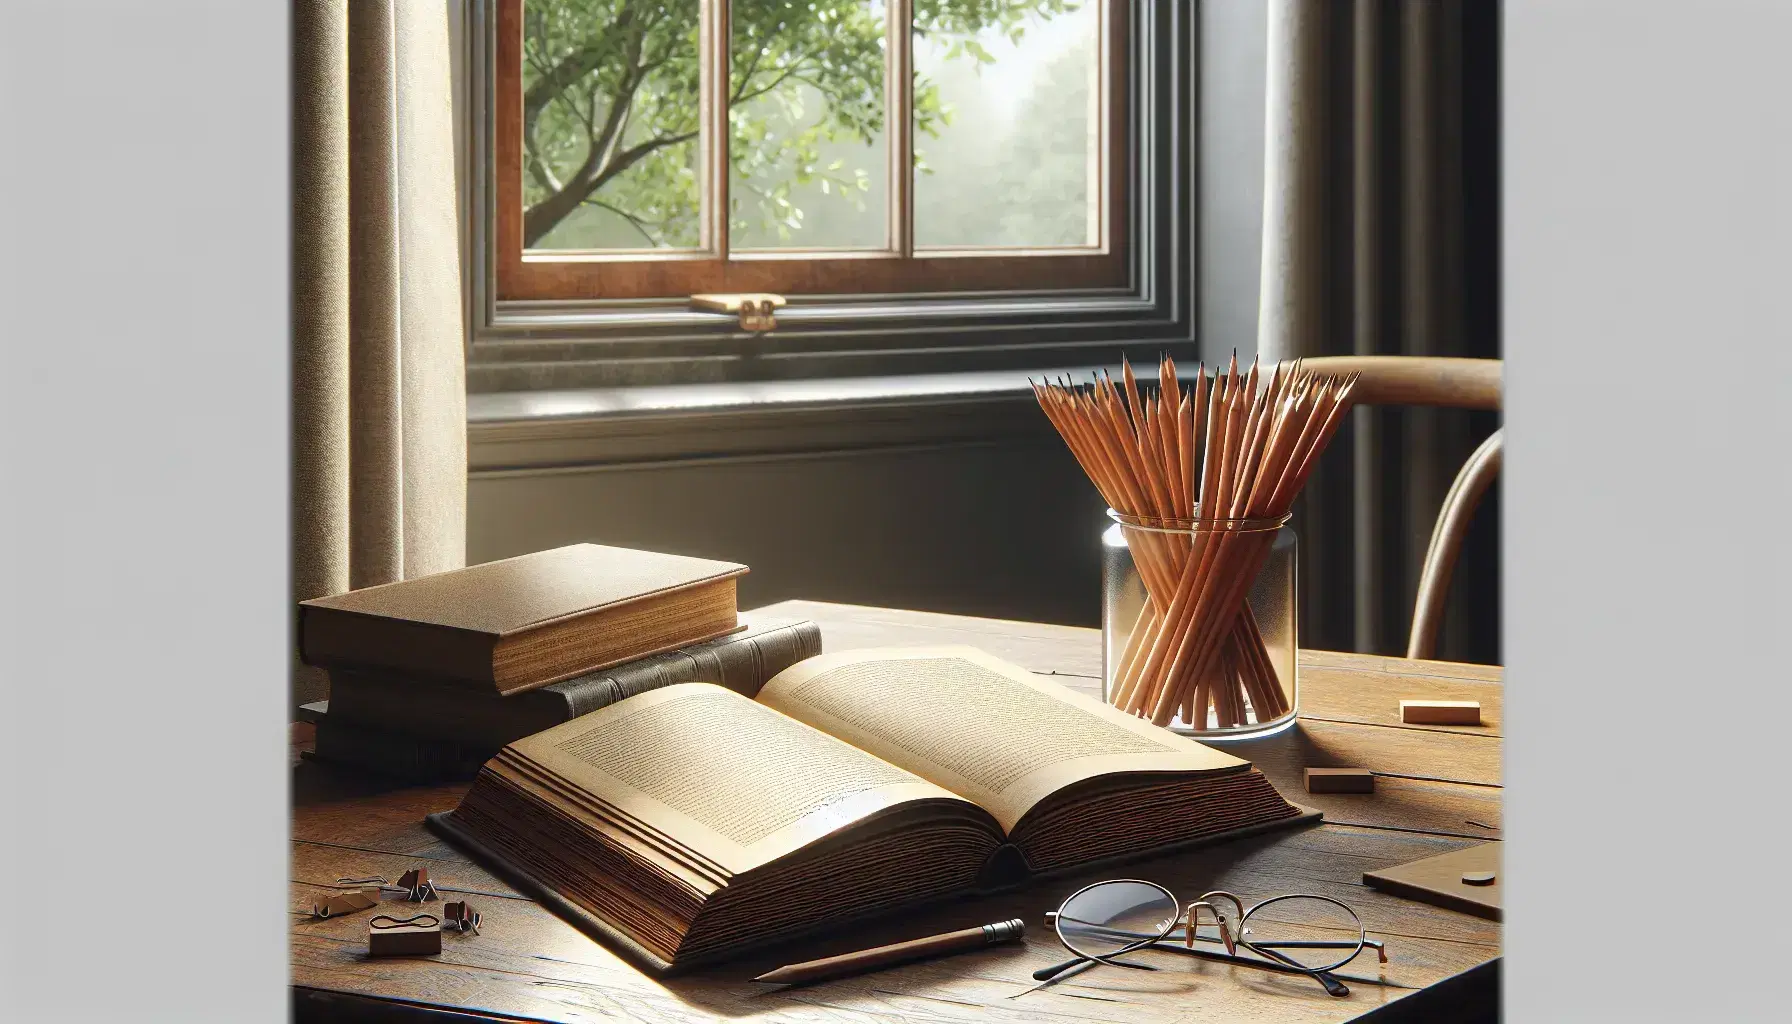 Serene study room with a wooden desk, open book, glass jar of pencils, eyeglasses, and a window overlooking a lush tree, adjacent to a book-filled shelf.